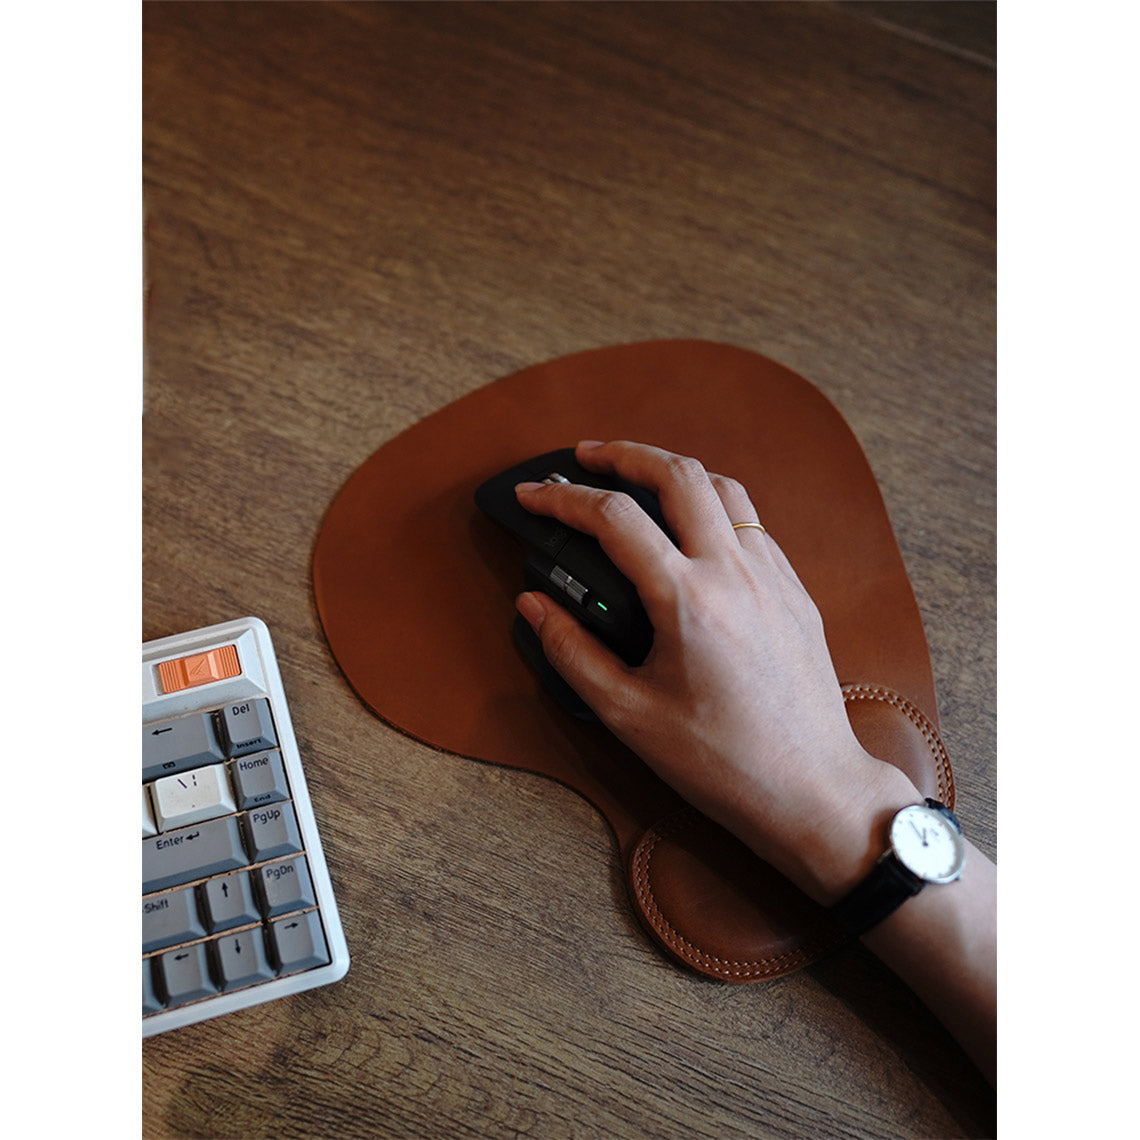 Computer Mouse Pad with Wrist Rest Design - POPSEWING®